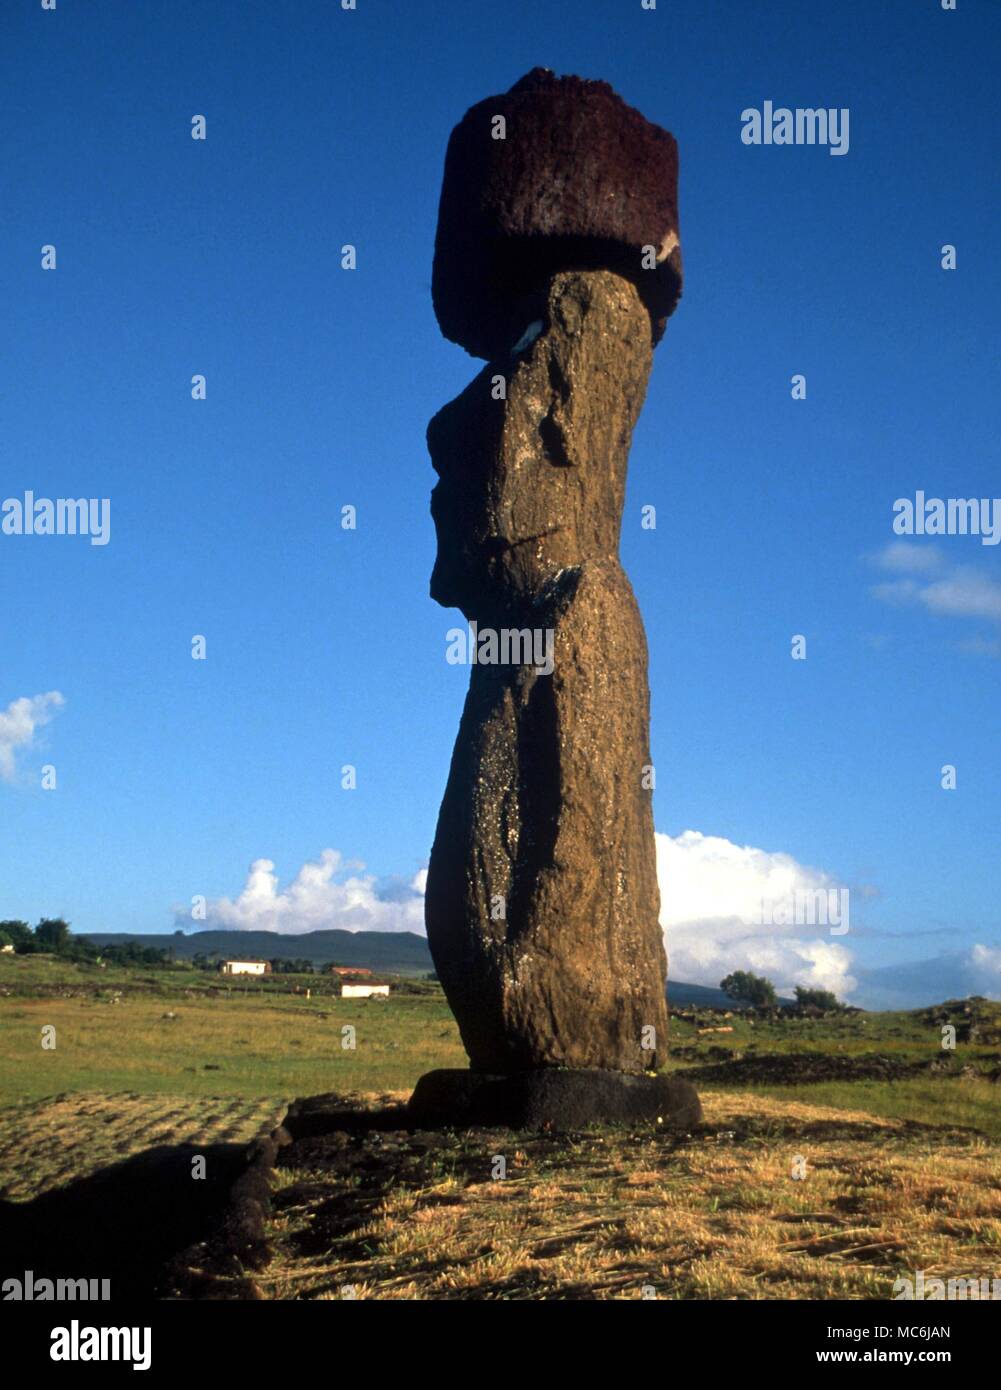 EASTER ISLAND - One of the upright giant statues near the ancient volcanic quarry on Easter Island. This enormous figure balances a tufa block on its head Stock Photo